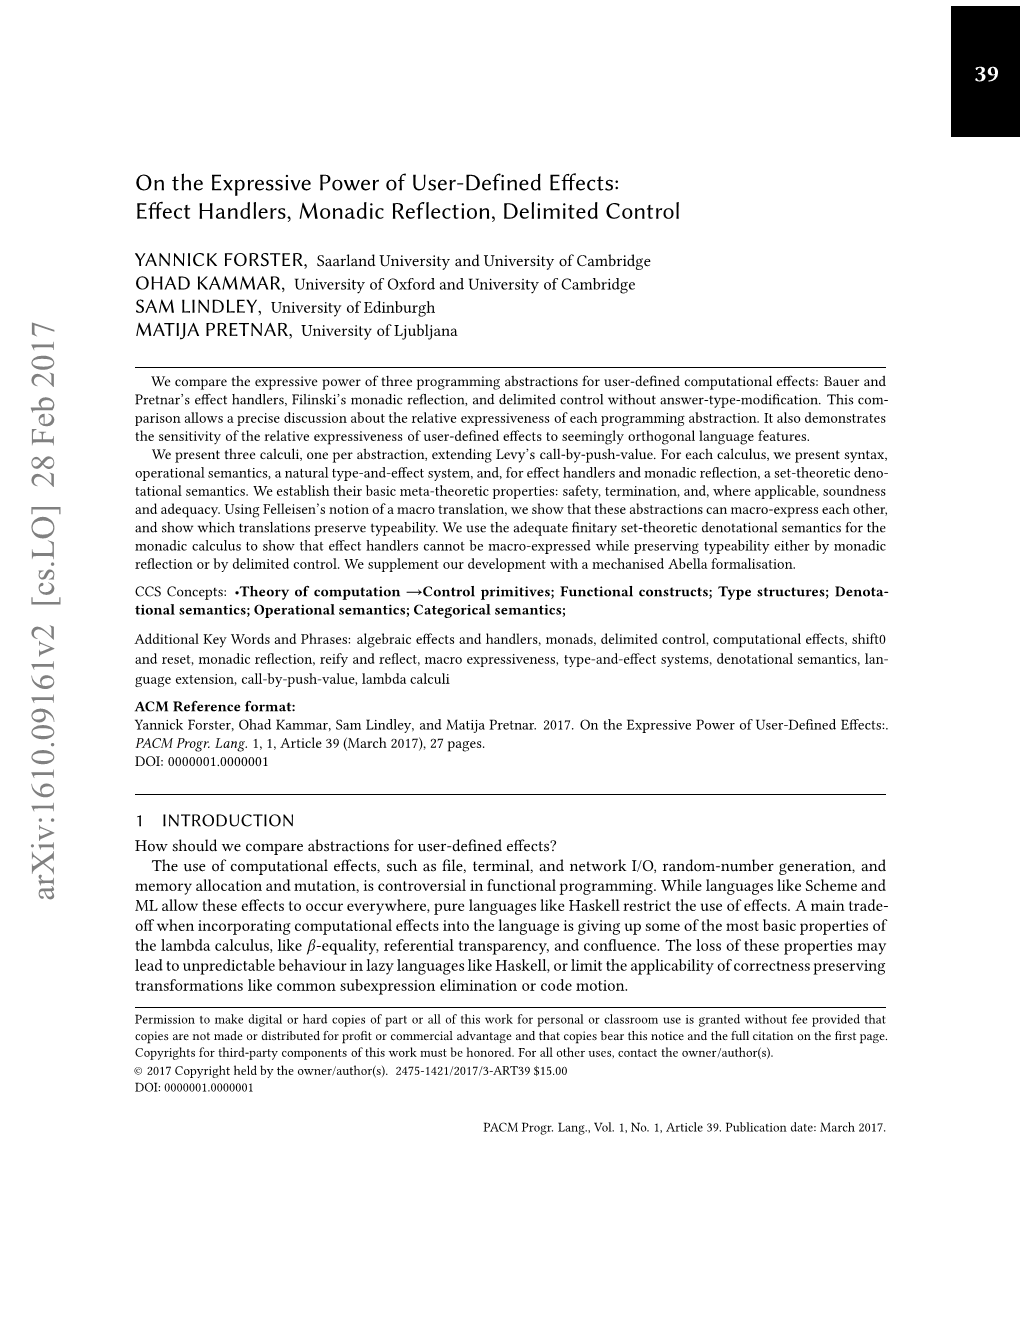 On the Expressive Power of User-Defined Effects